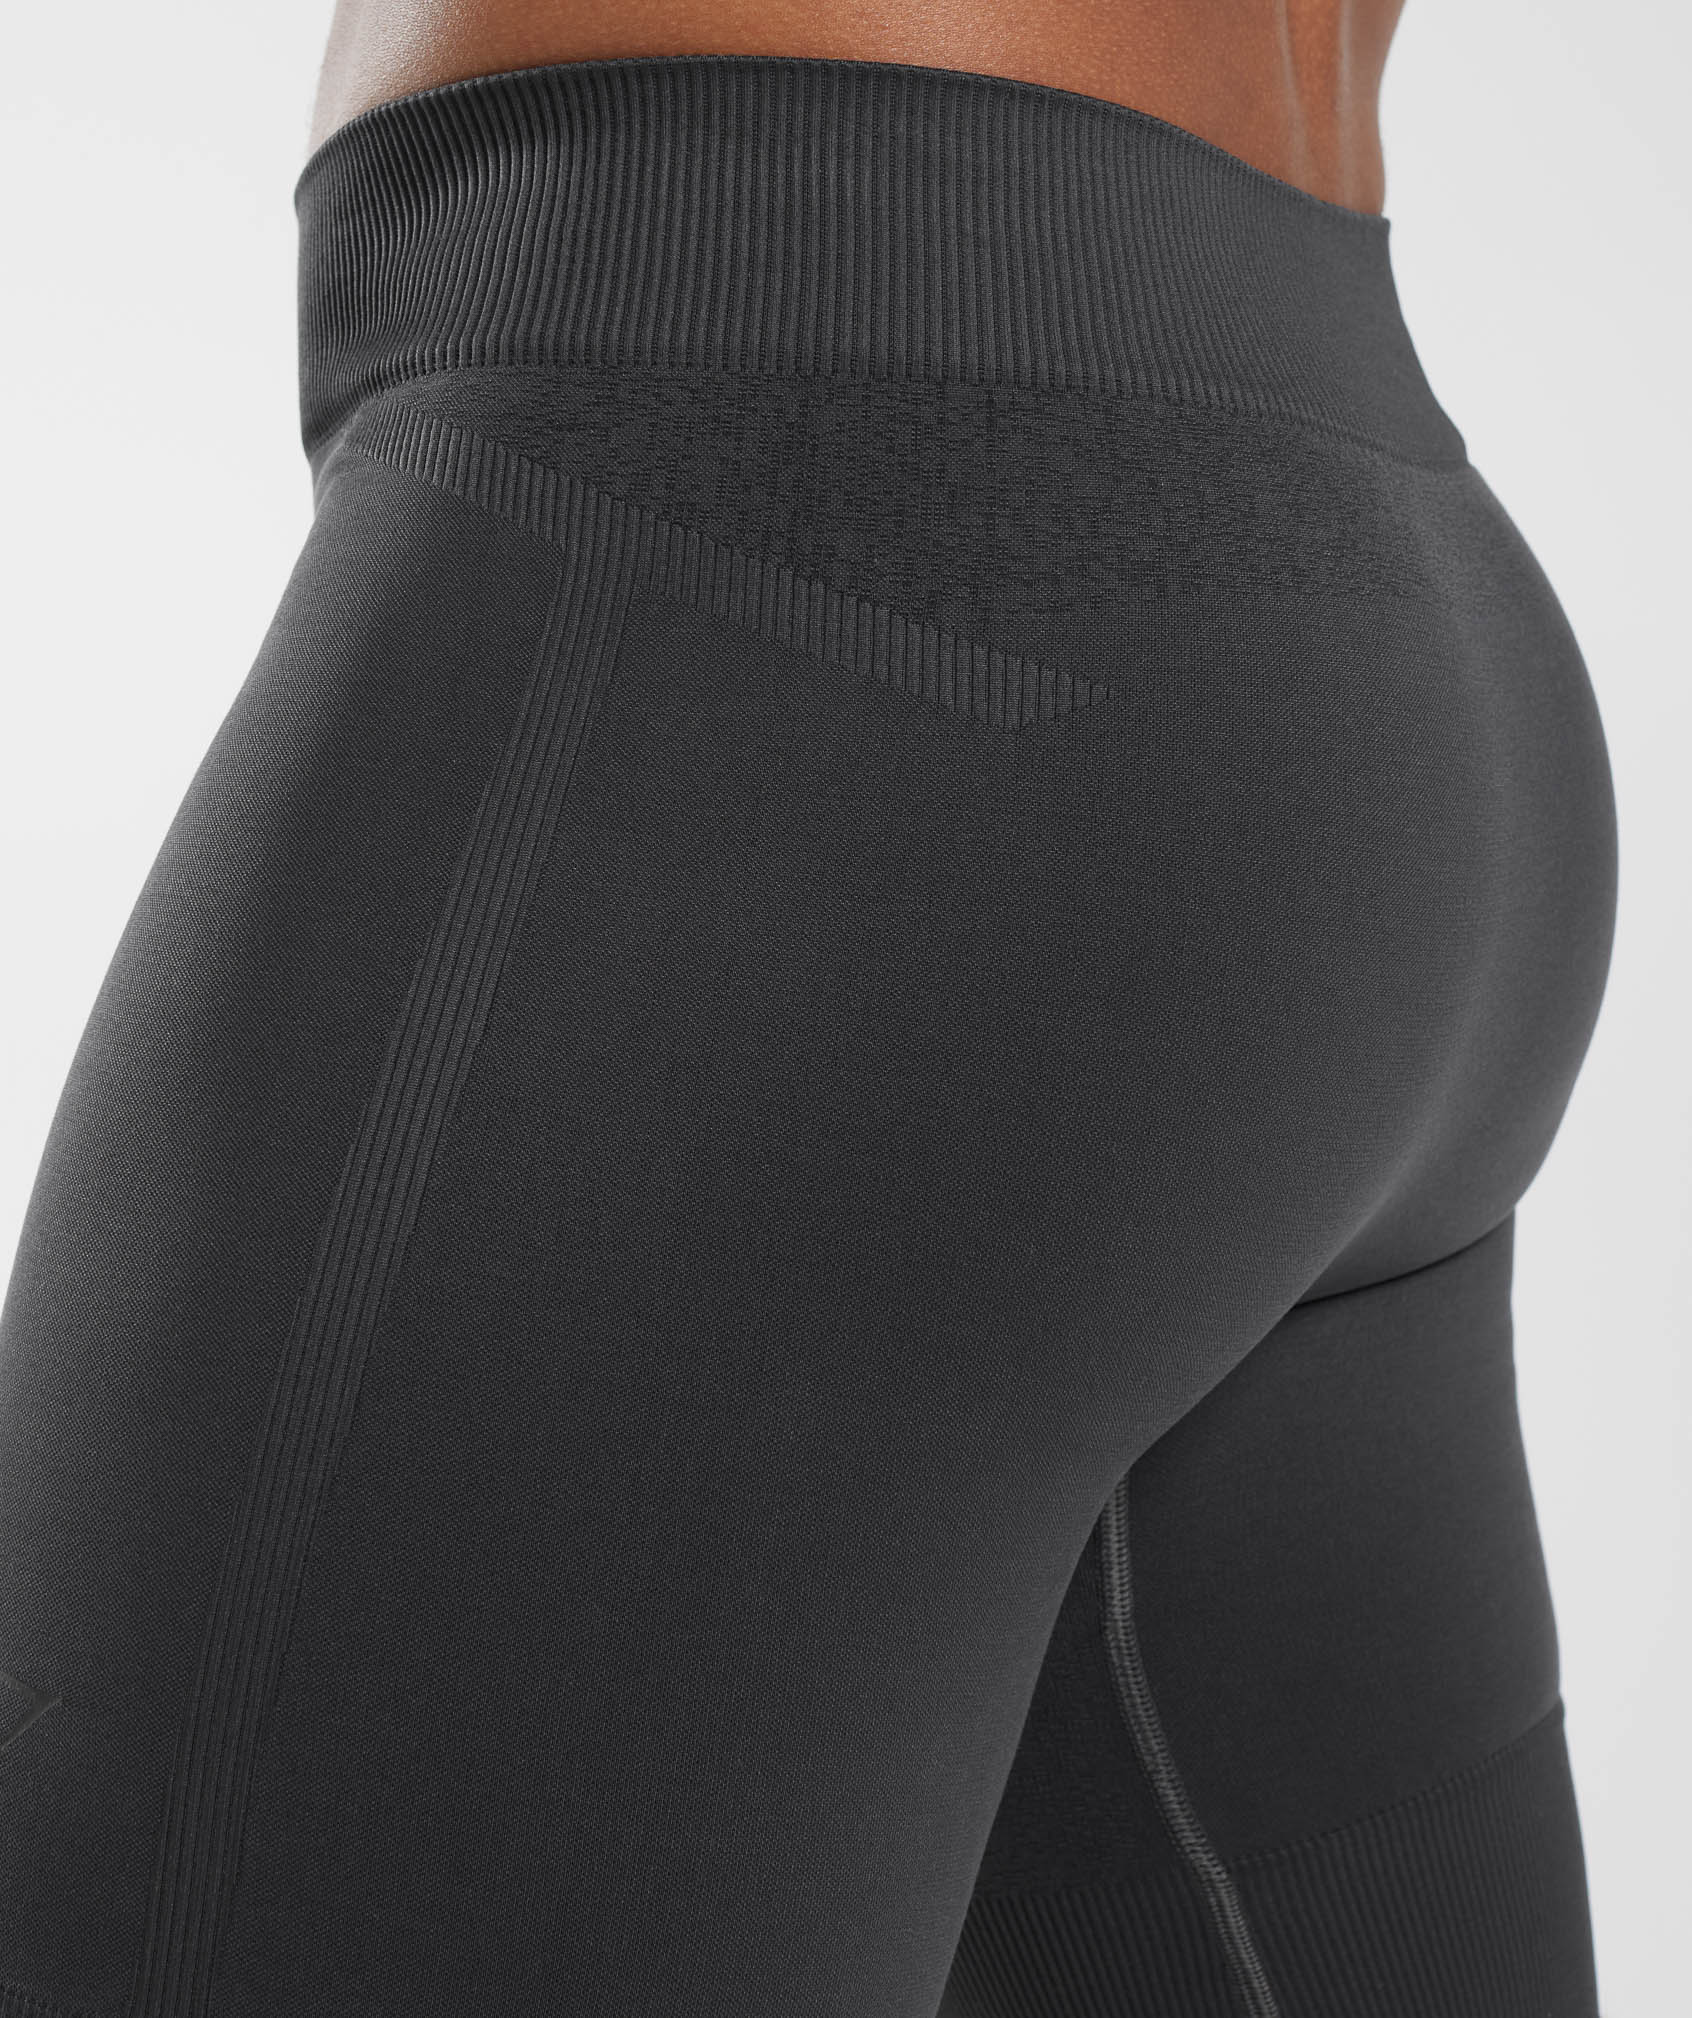 Running Seamless 7" Shorts in Onyx Grey - view 4